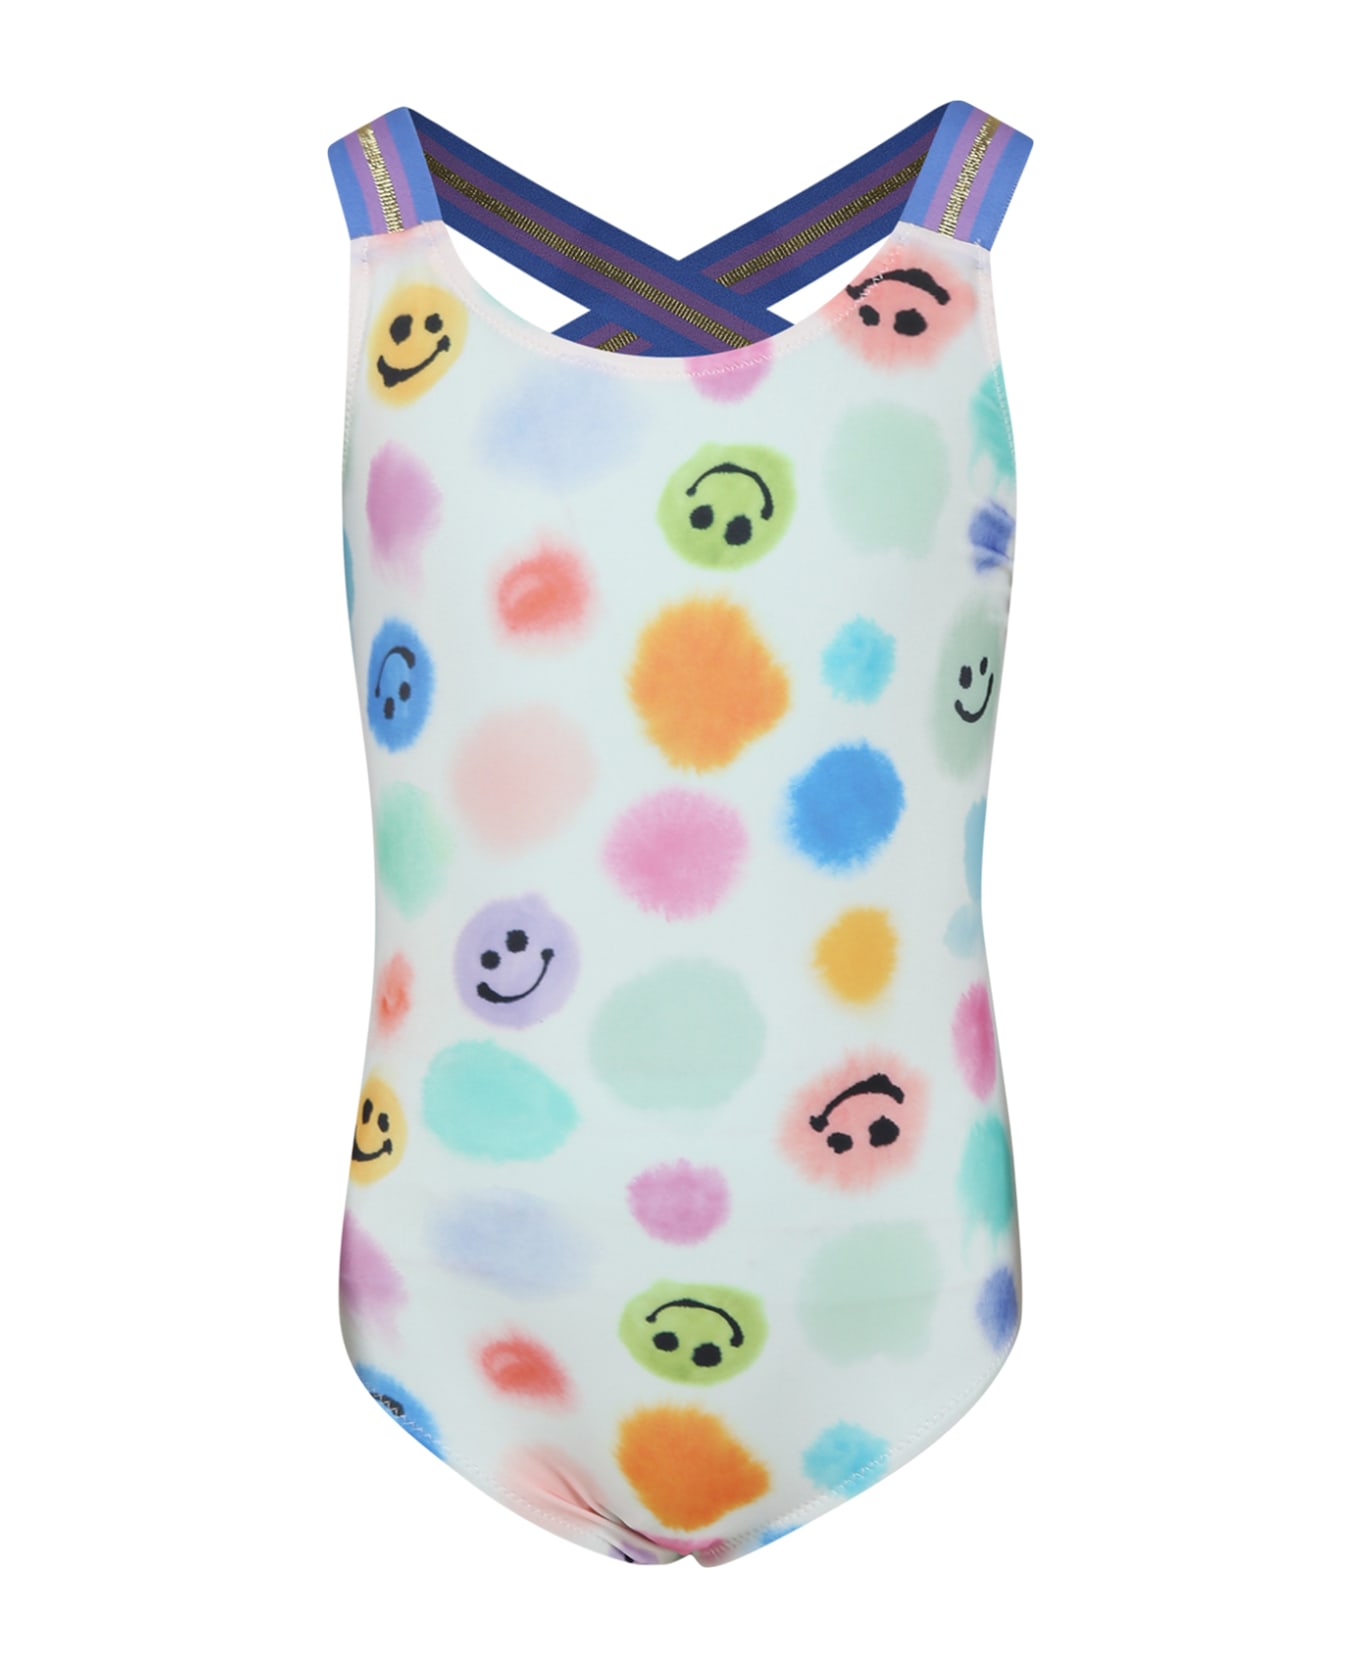 Molo White Swimsuit For Girl With Polka Dots And Smiley - Multicolor